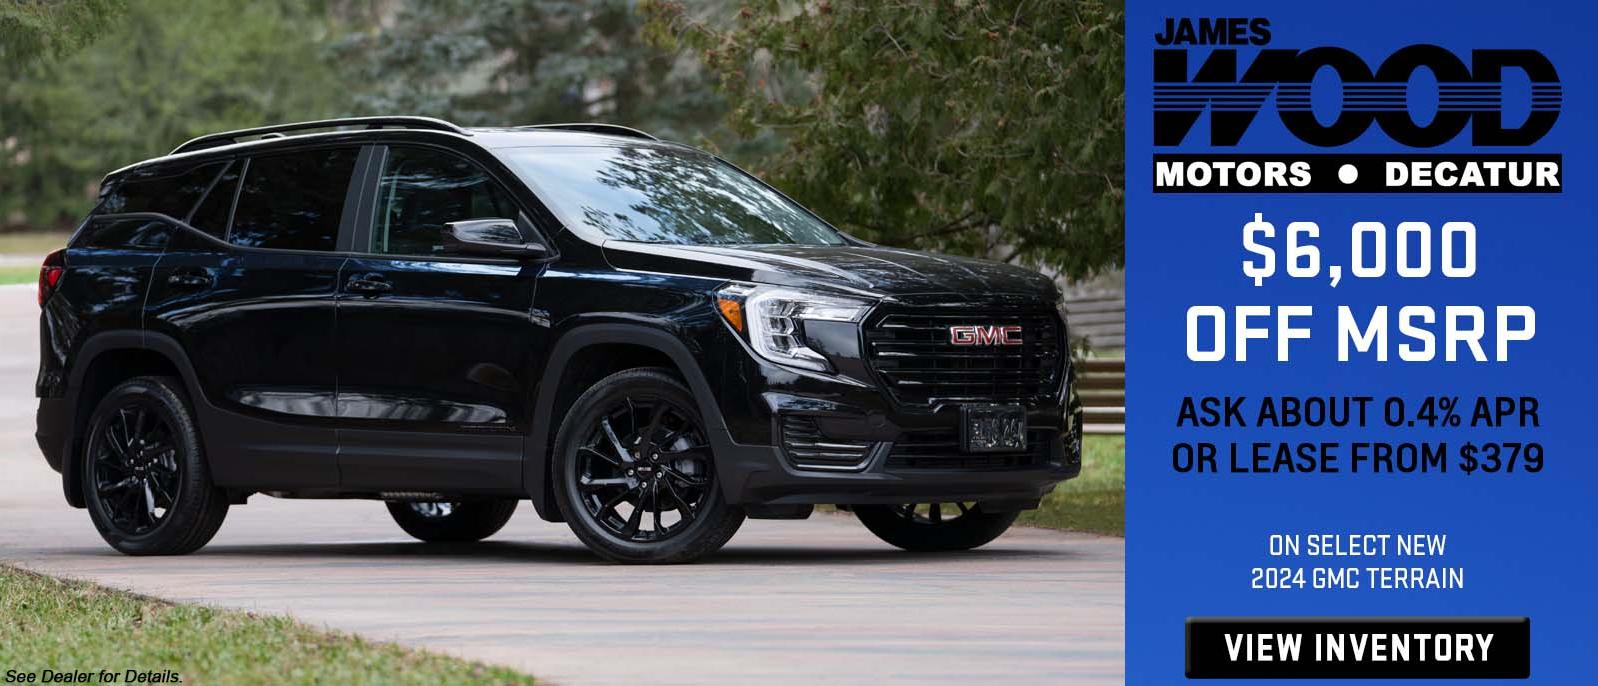 Get $6,000 Off MSRP, Ask about 0.4% APR and No Payments for 90 Days or Lease from $379 on Select 2024 GMC Terrain at James Wood Decatur Ft Worth Texas